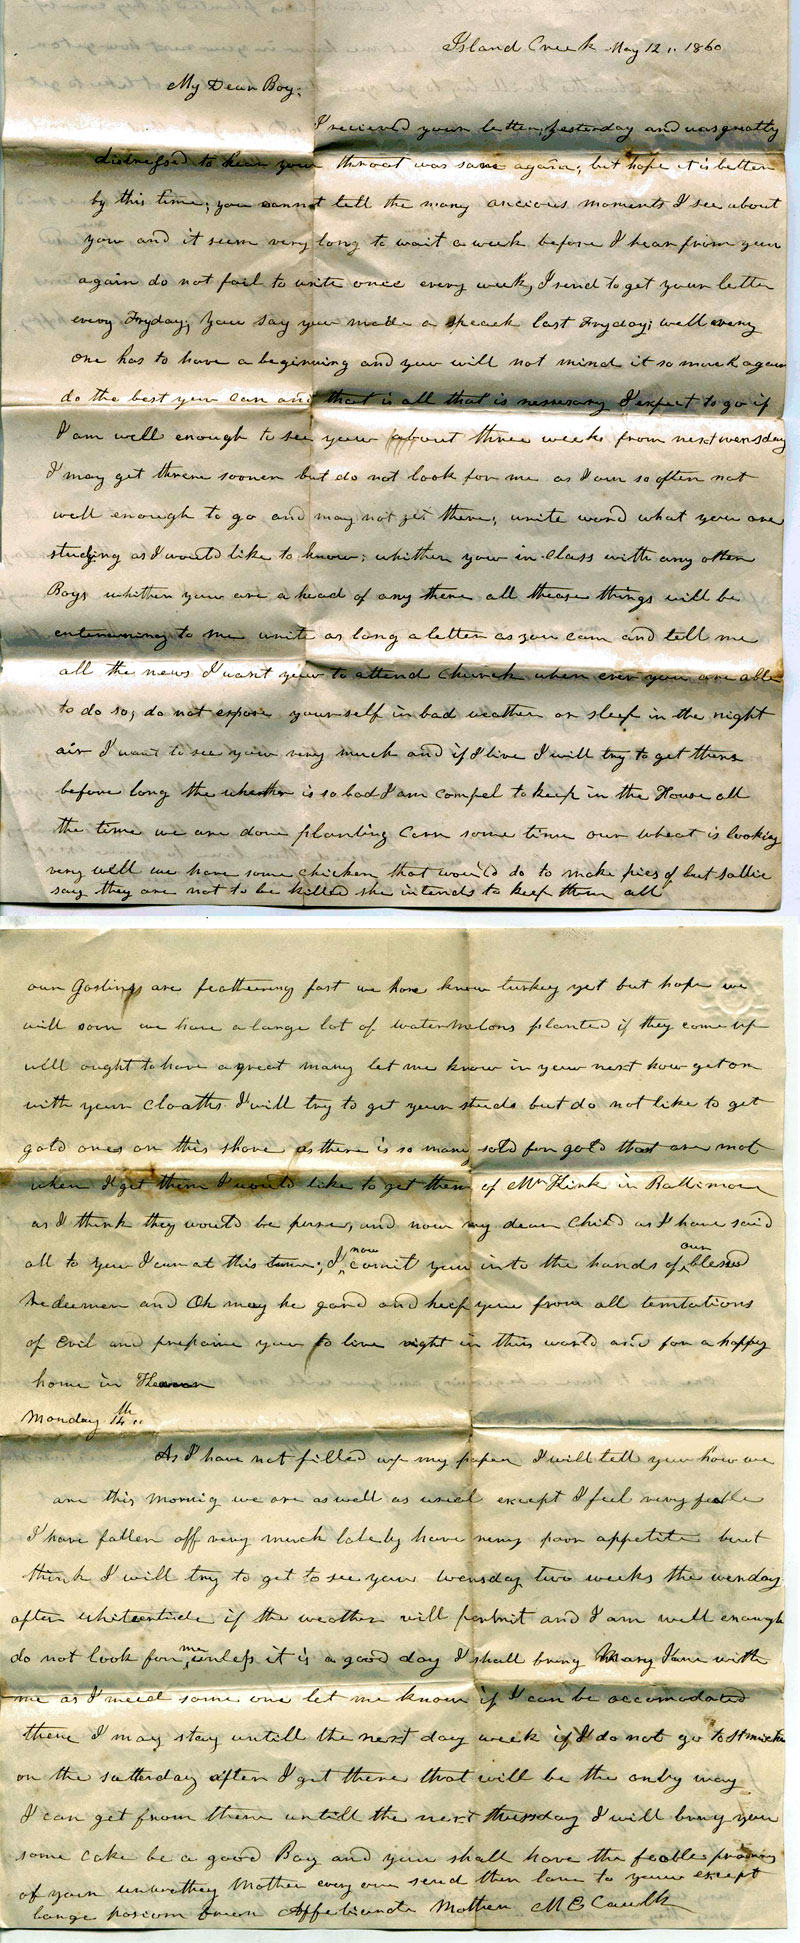 Letter dated May 12, 1860 from Mary Elizabeth Caulk to her son William